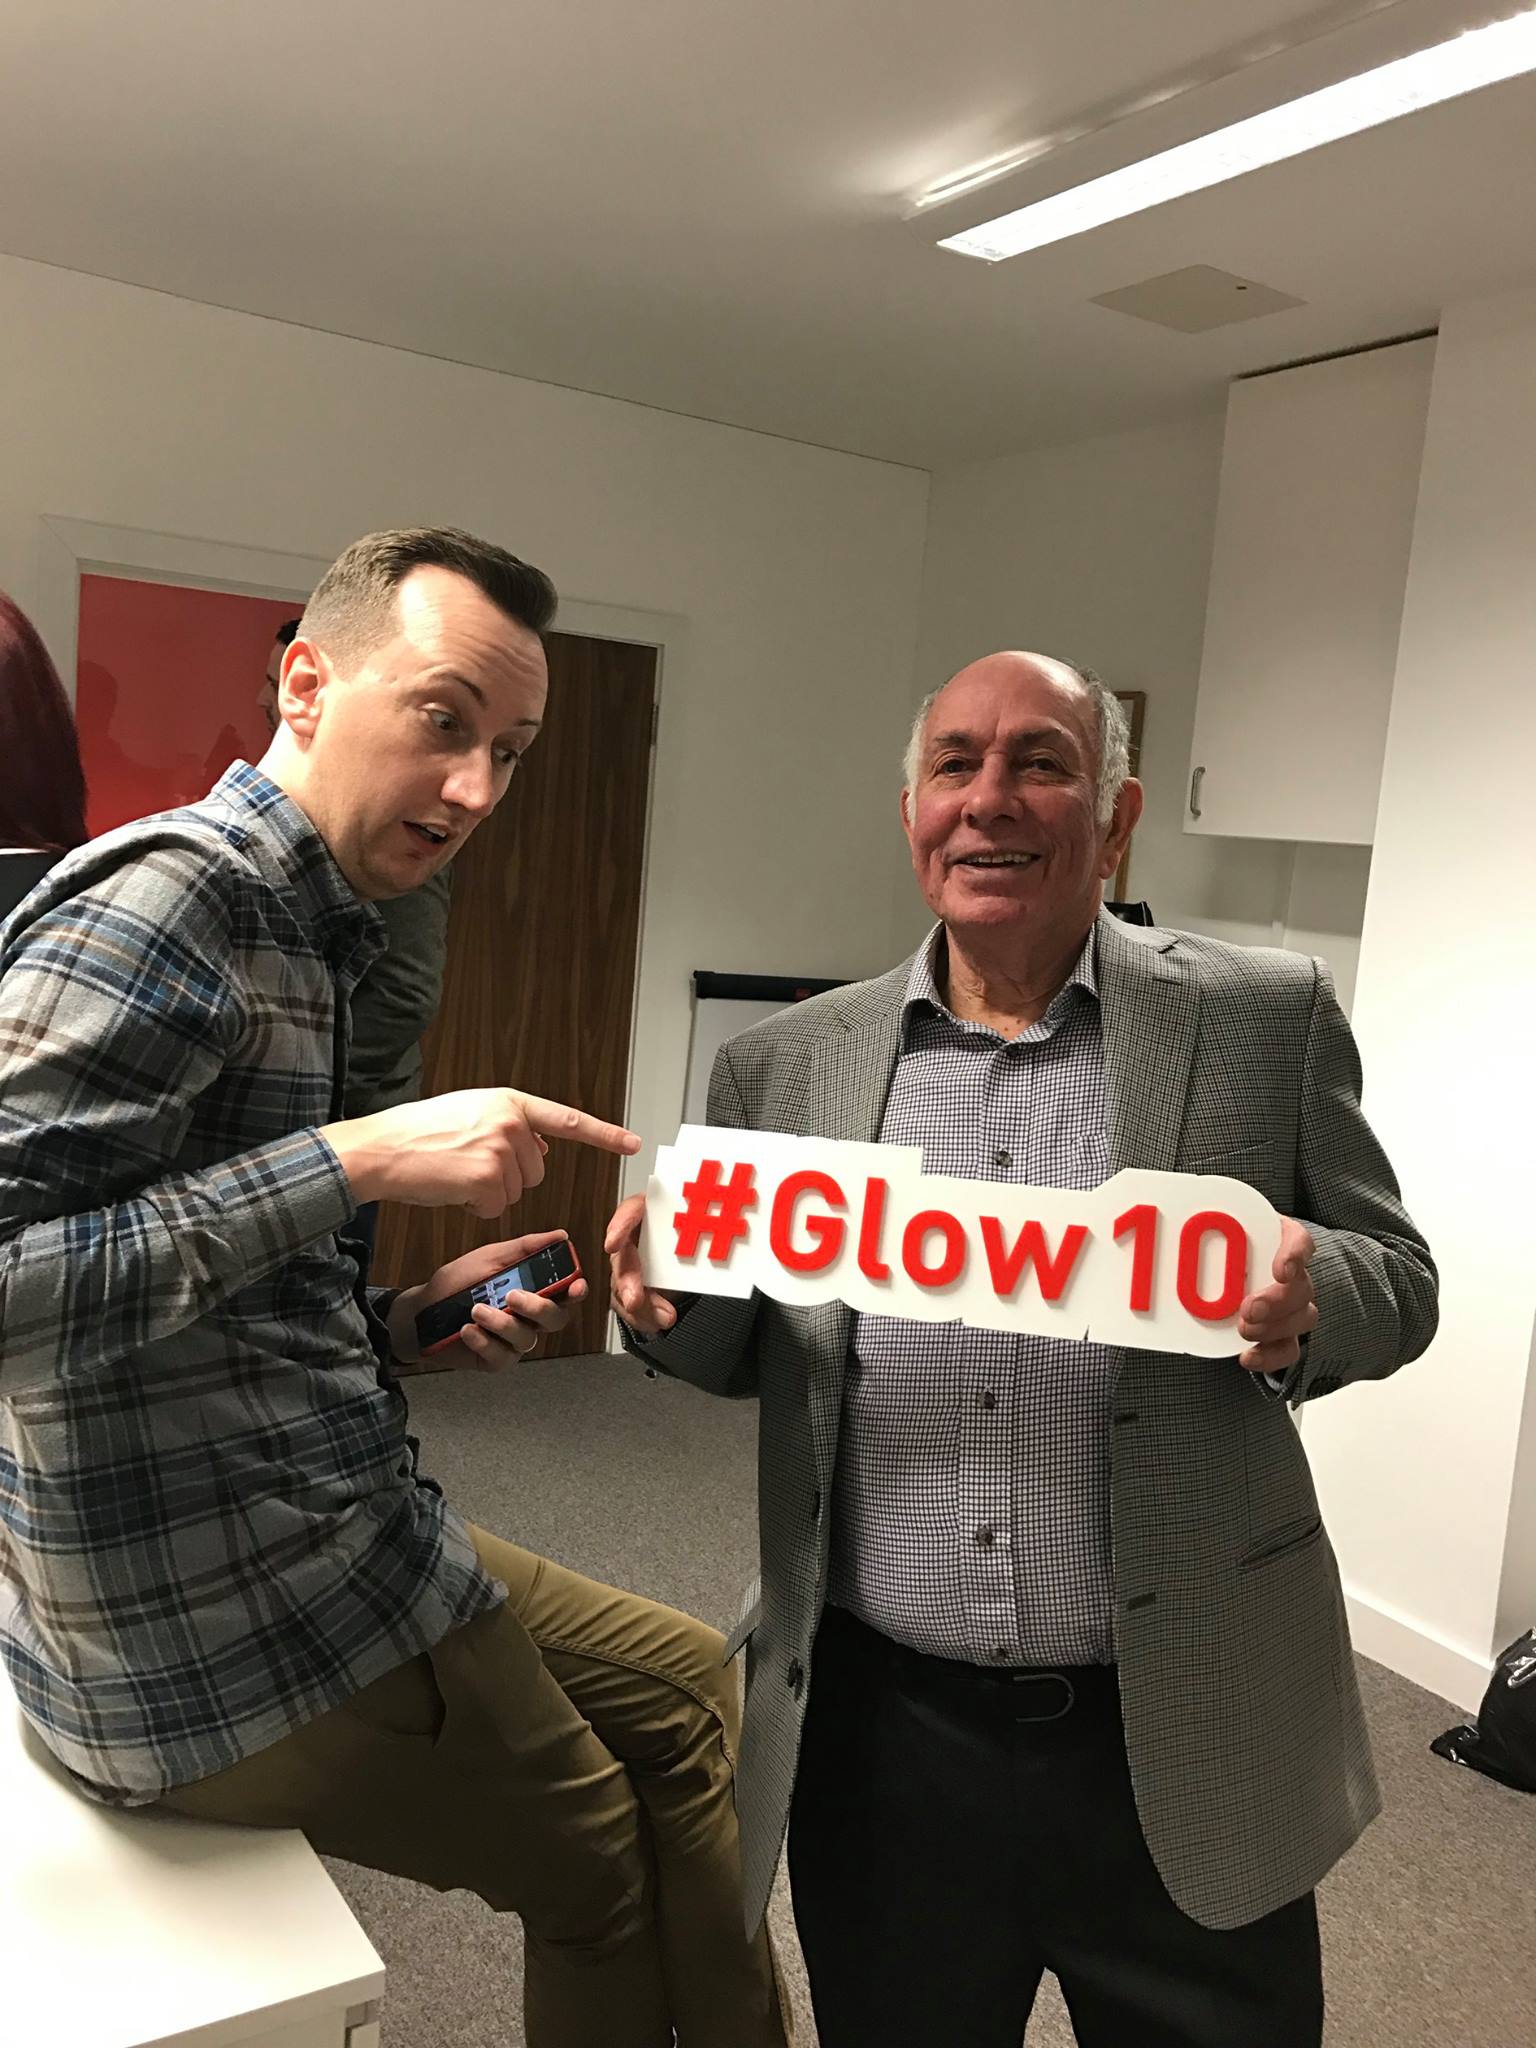 People with a glow10 sign